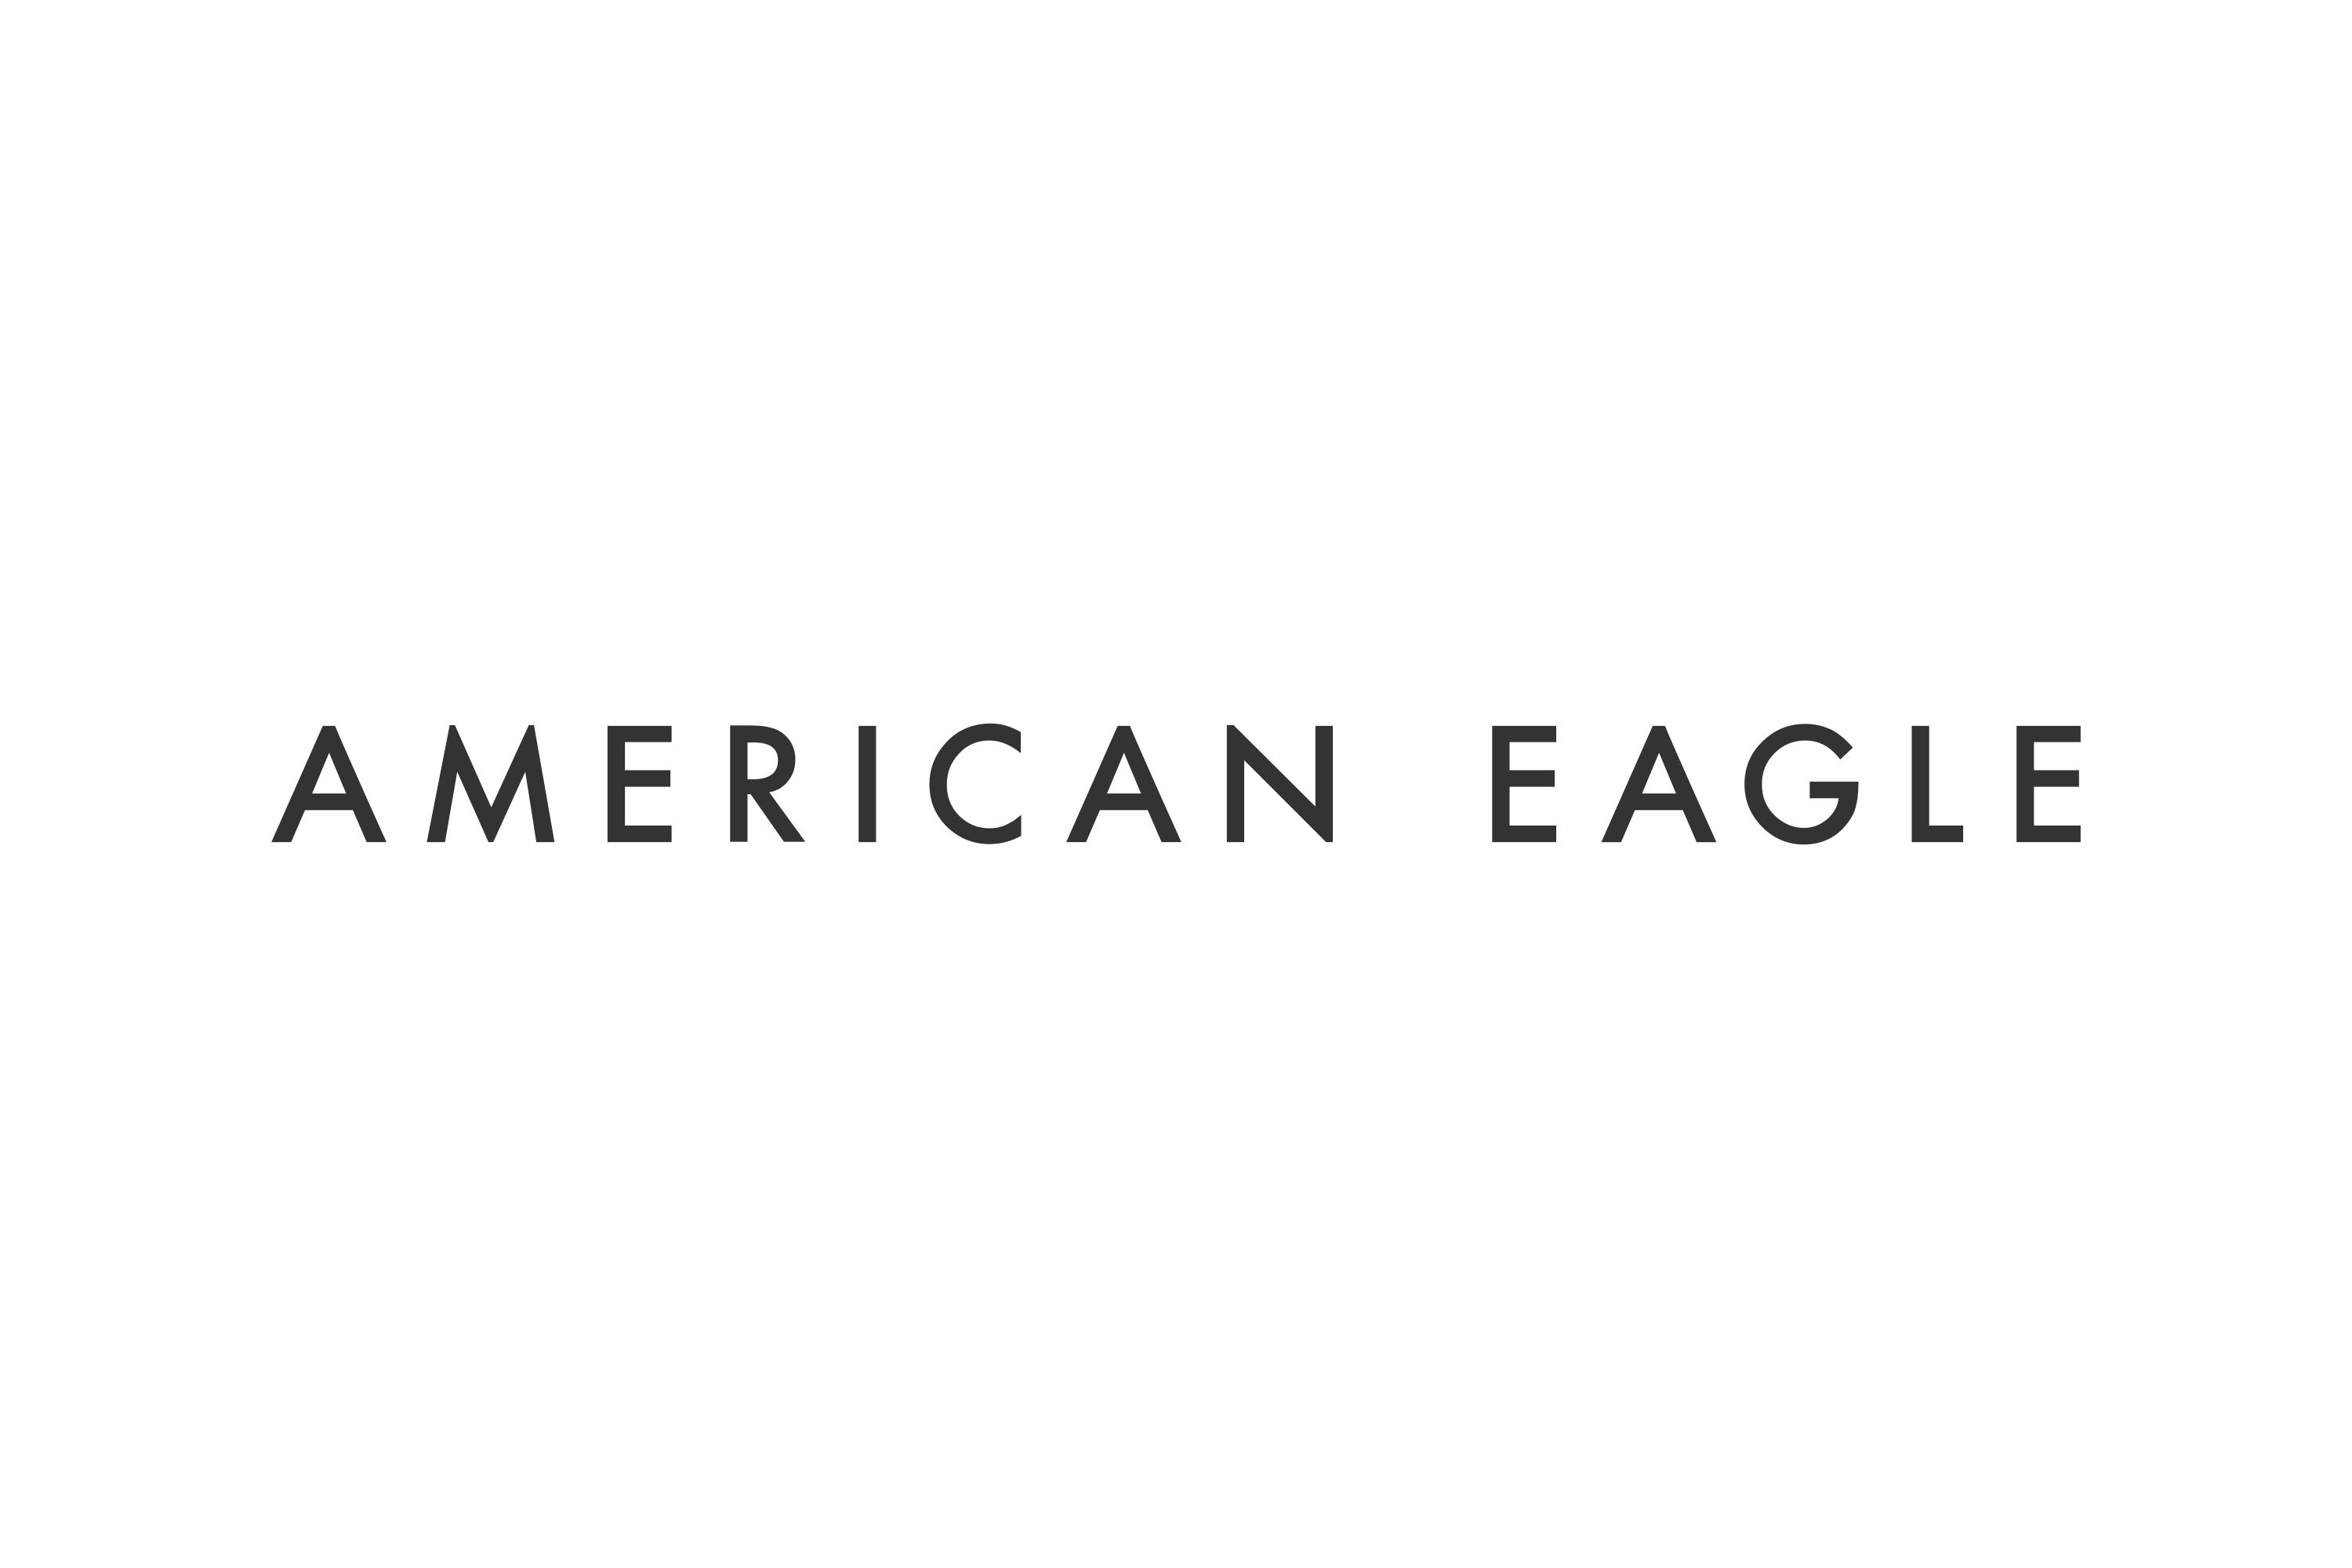 Download American Eagle Outfitters Logo in SVG Vector or PNG File